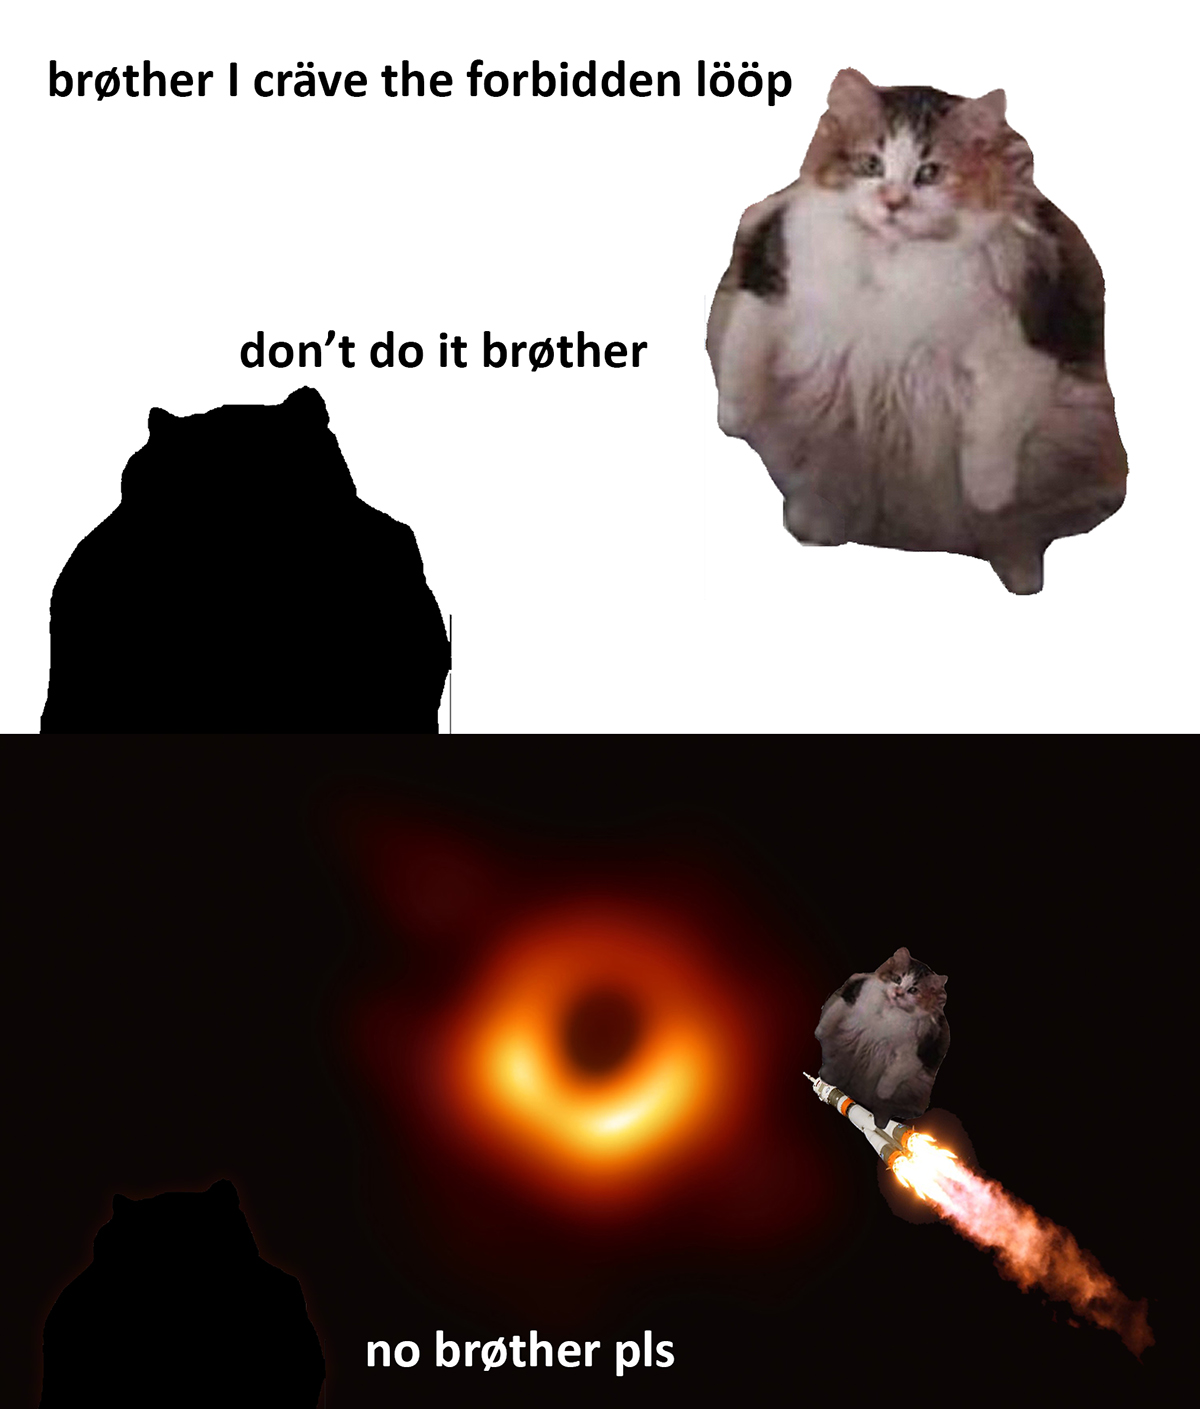 loops cat - black hole meme - brther I crve the forbidden lp don't do it brther no brther pls